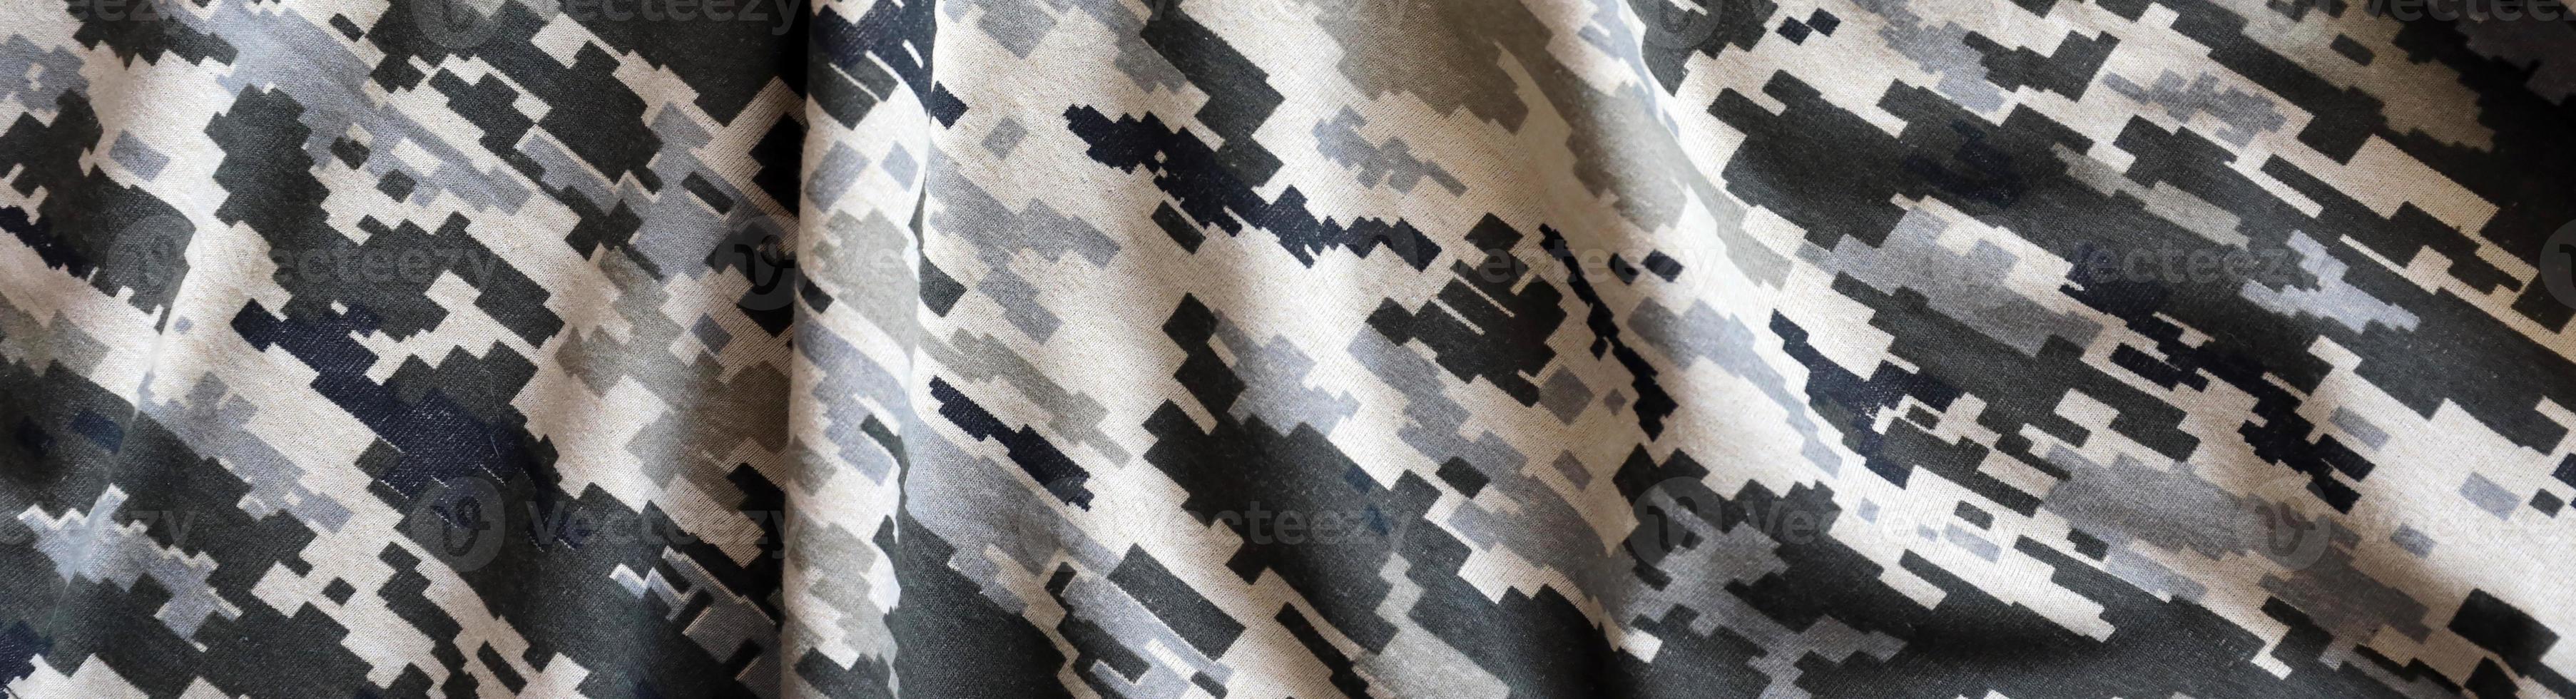 Fabric with texture of Ukrainian military pixeled camouflage. Cloth with camo pattern in grey, brown and green pixel shapes. Official uniform of Ukrainian soldiers photo